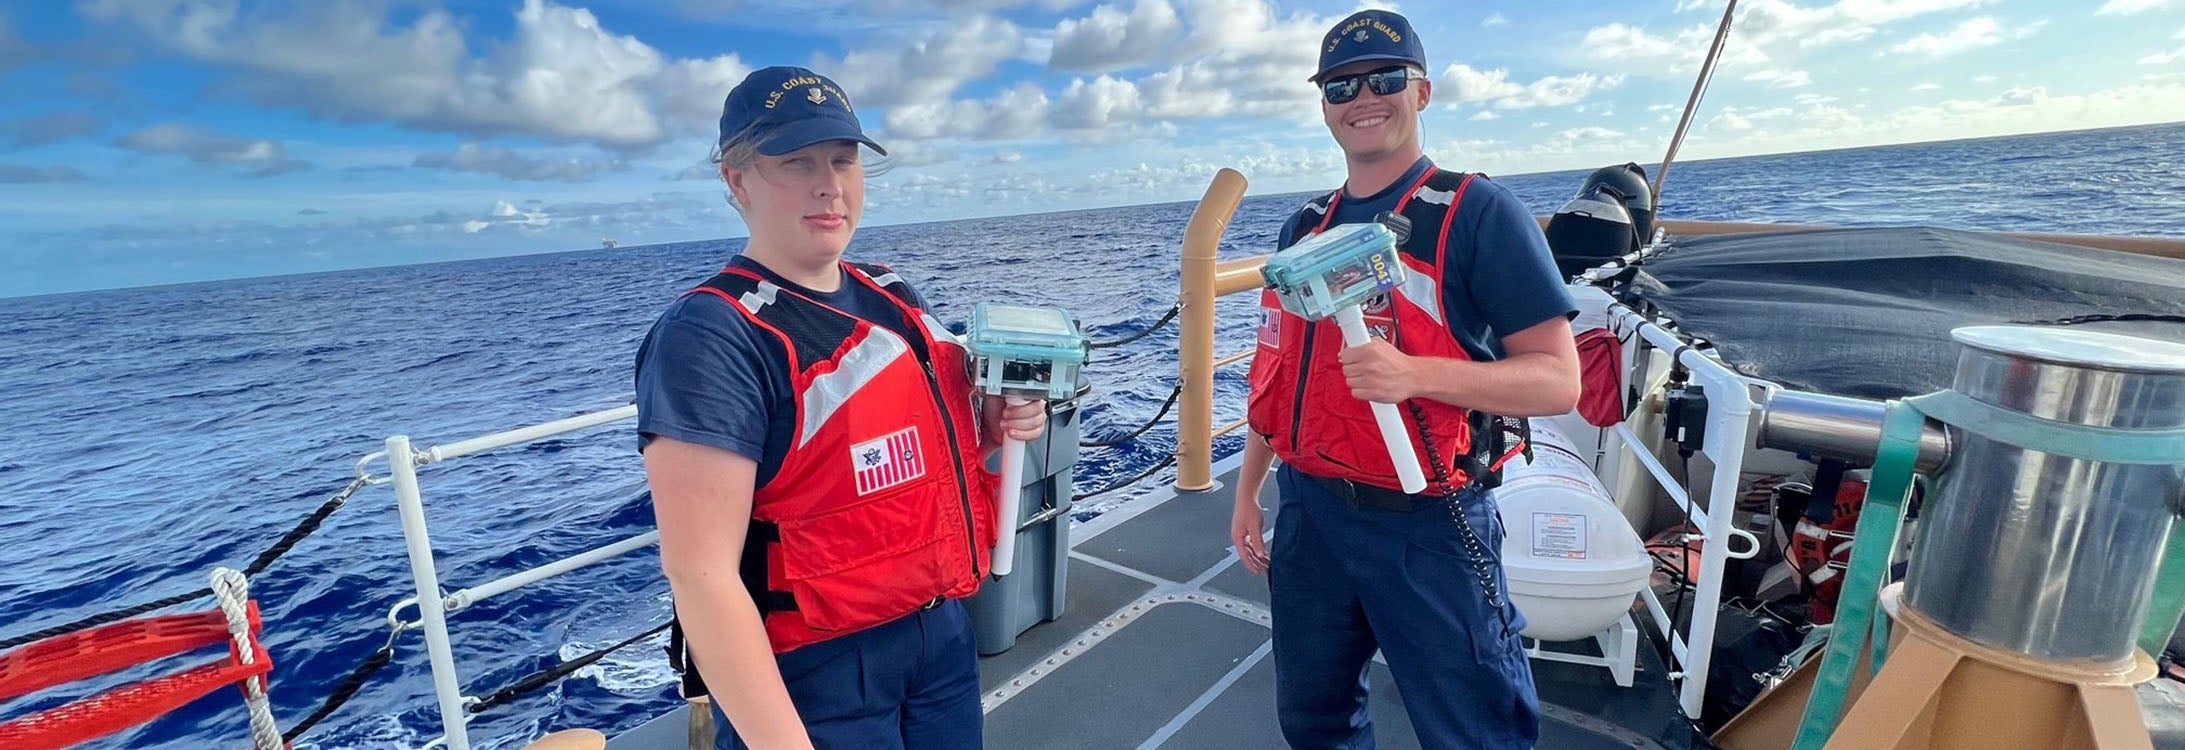 The U.S. Coast Guard assisted Dr. Dan Dickerson’s Summer Ventures class in deploying buoys that would monitor and map ocean currents.